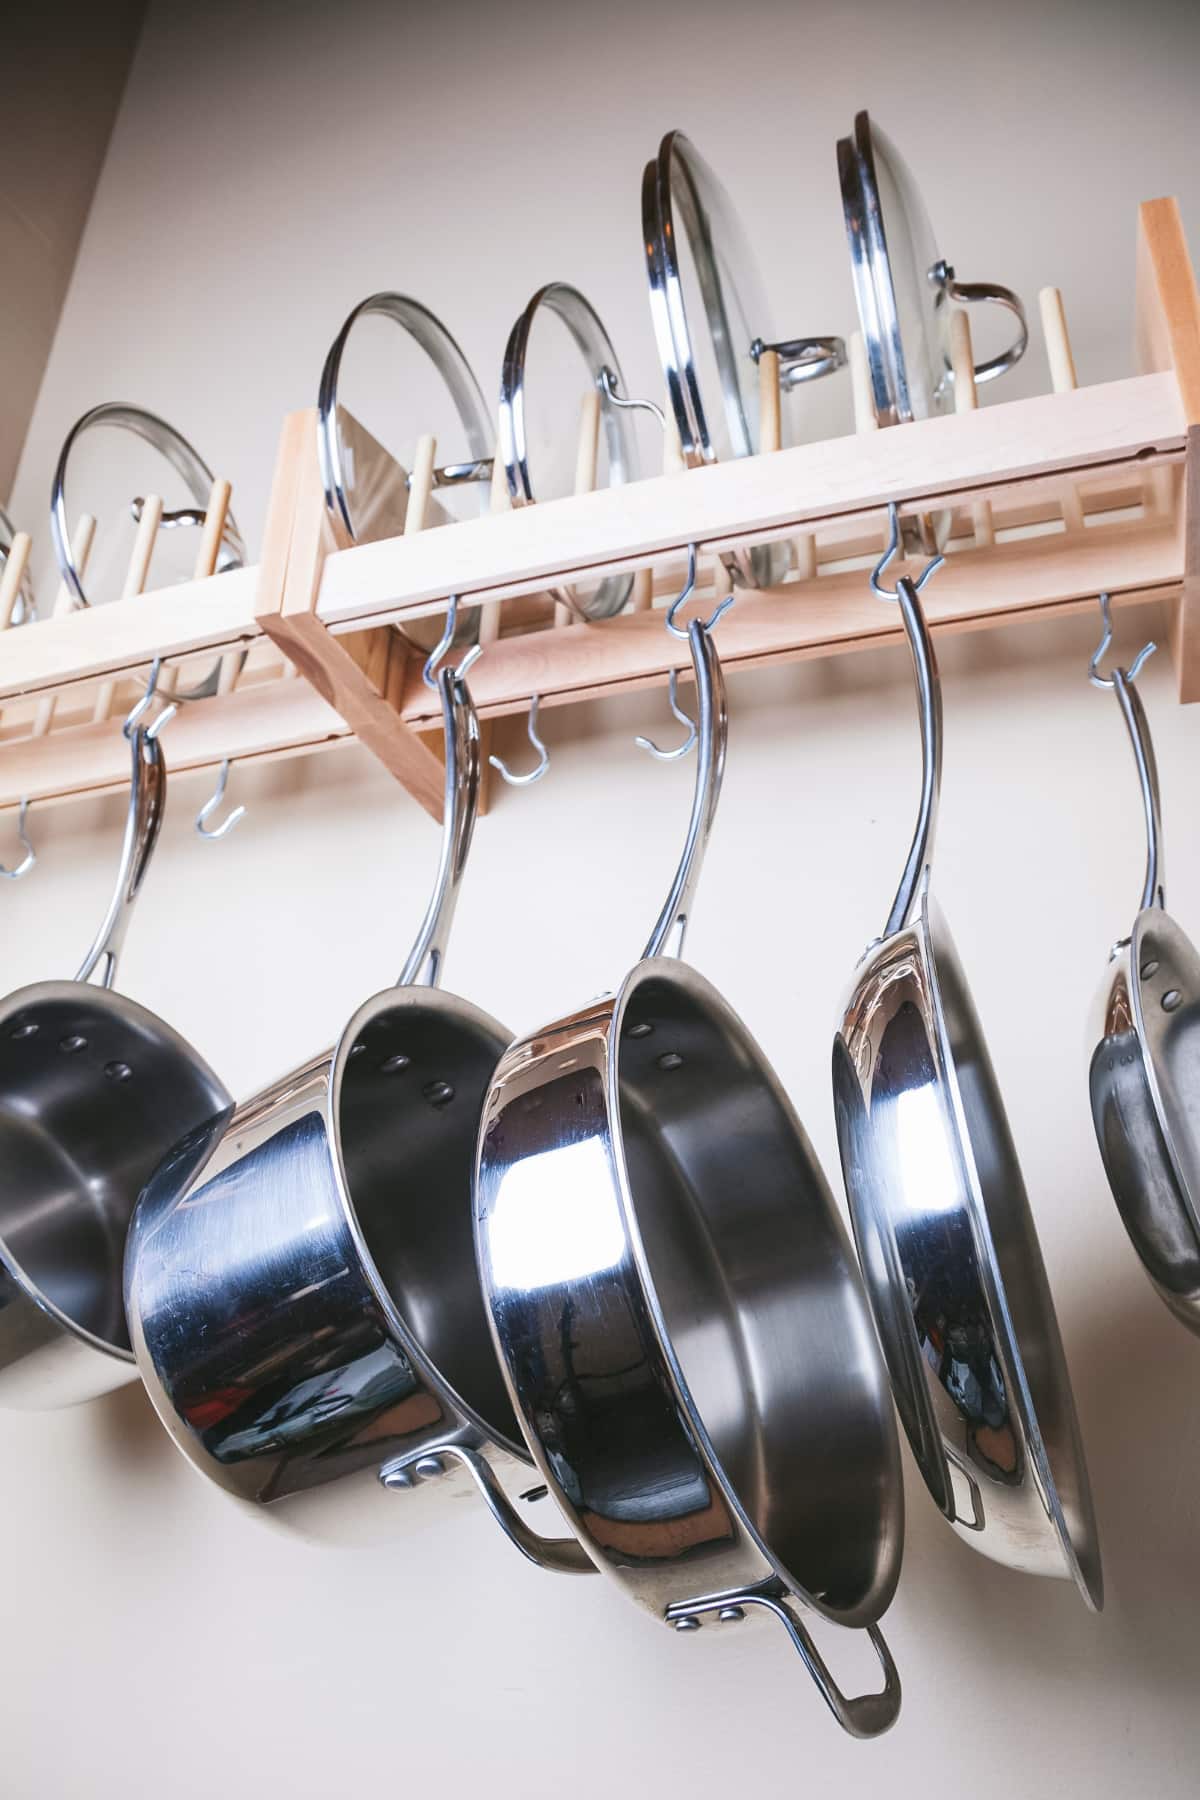 Stainless steel pots and pans hanging from a wooden shelf.